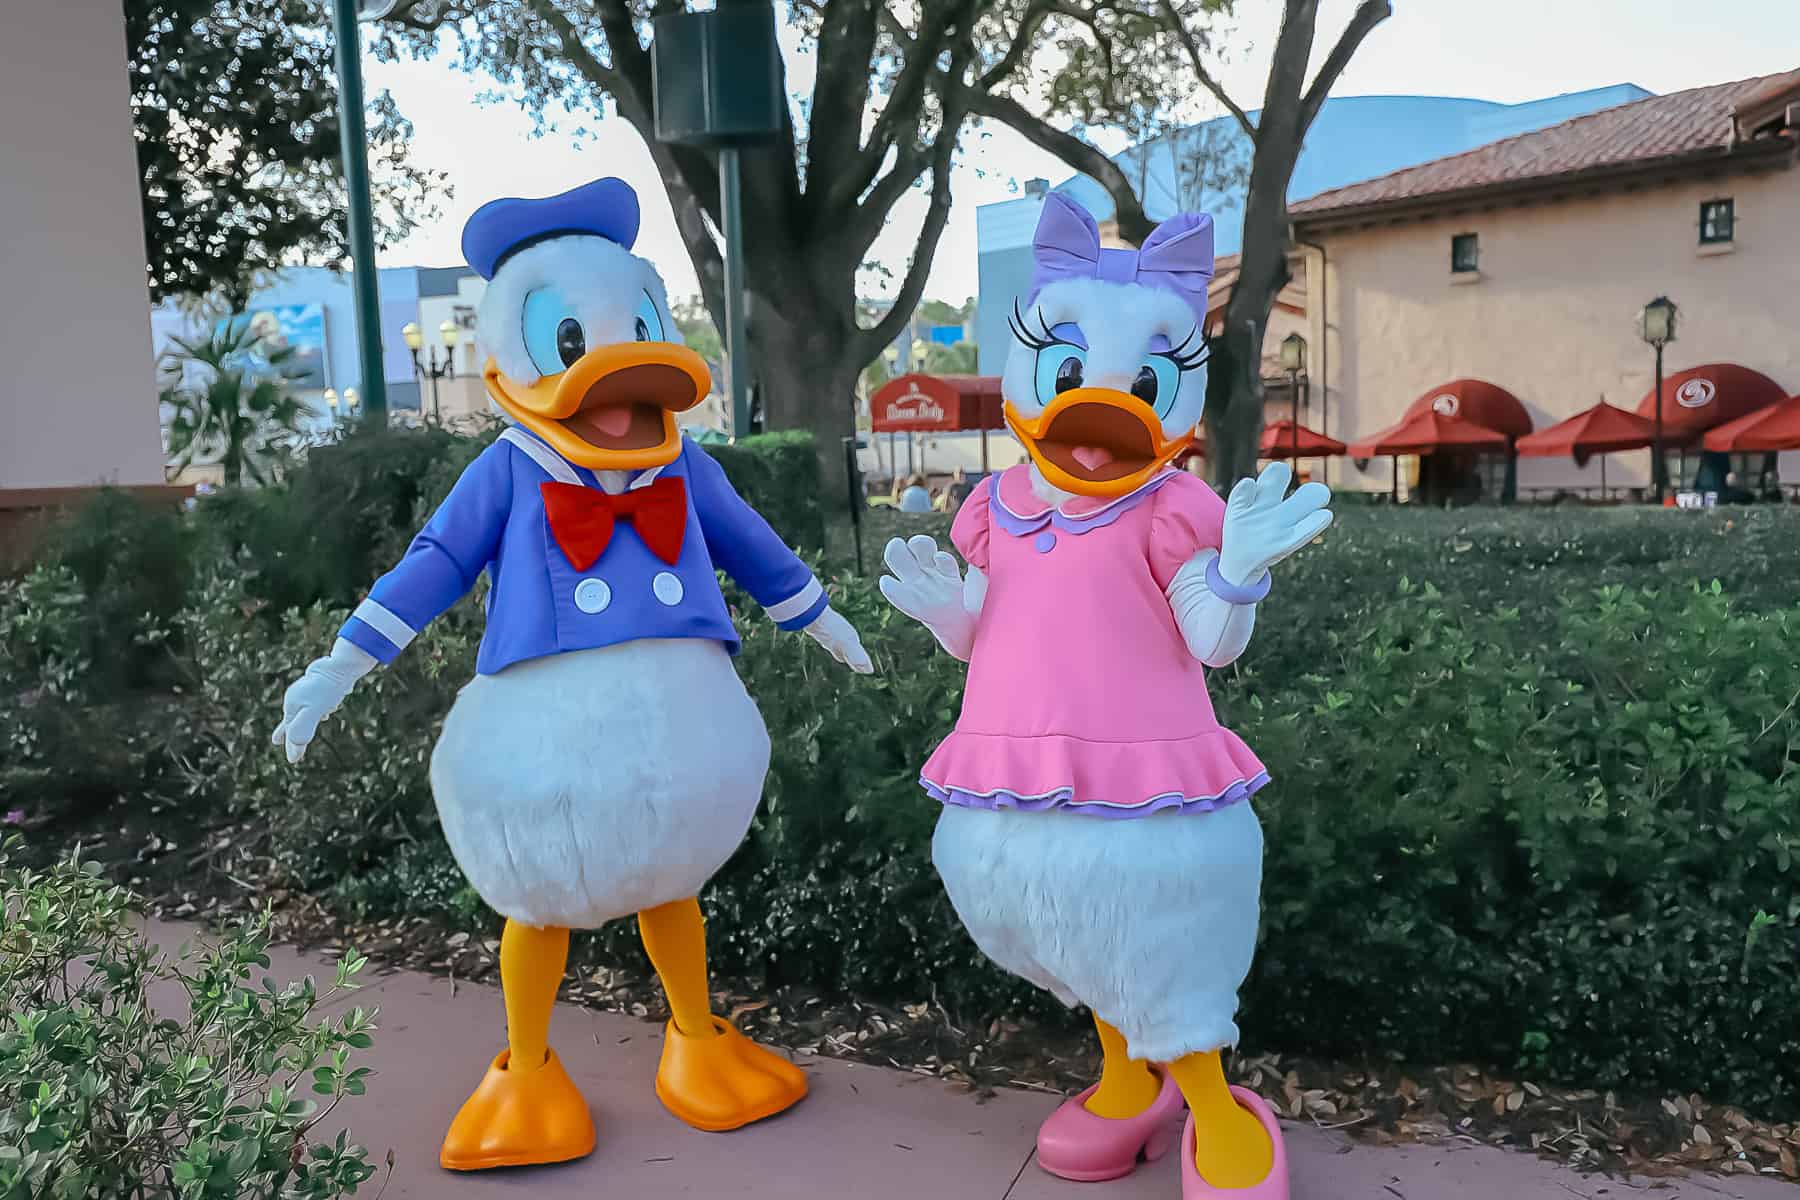 Donald and Daisy Duck in traditional costumes